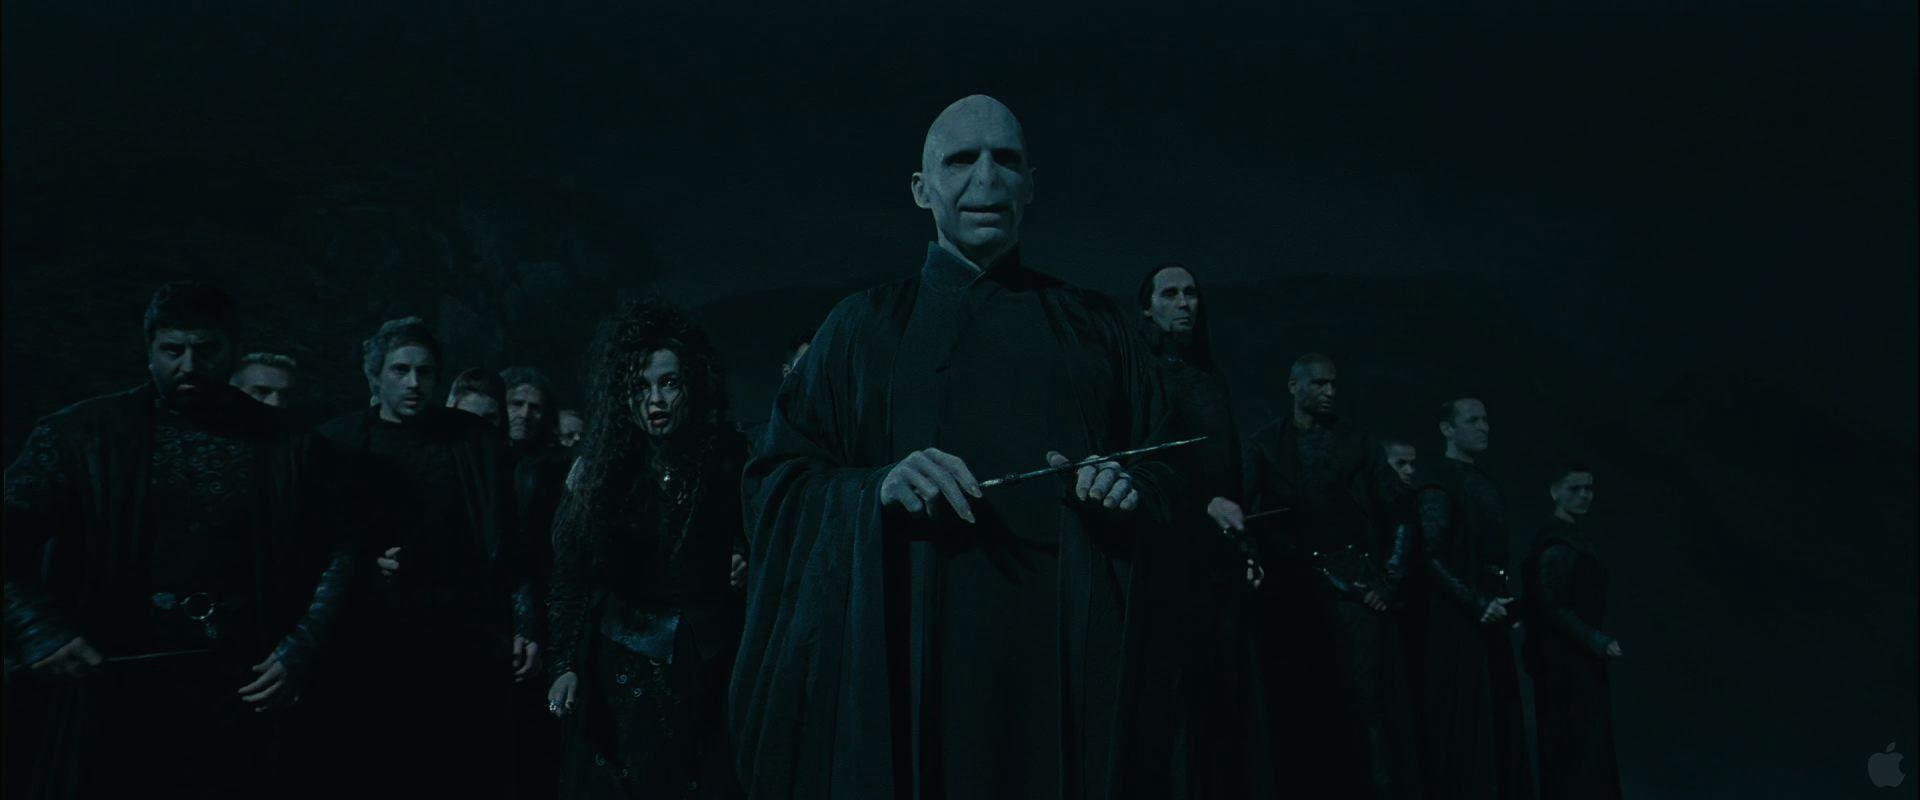 Lord Voldemort and Followers from Harry Potter and the Deathly